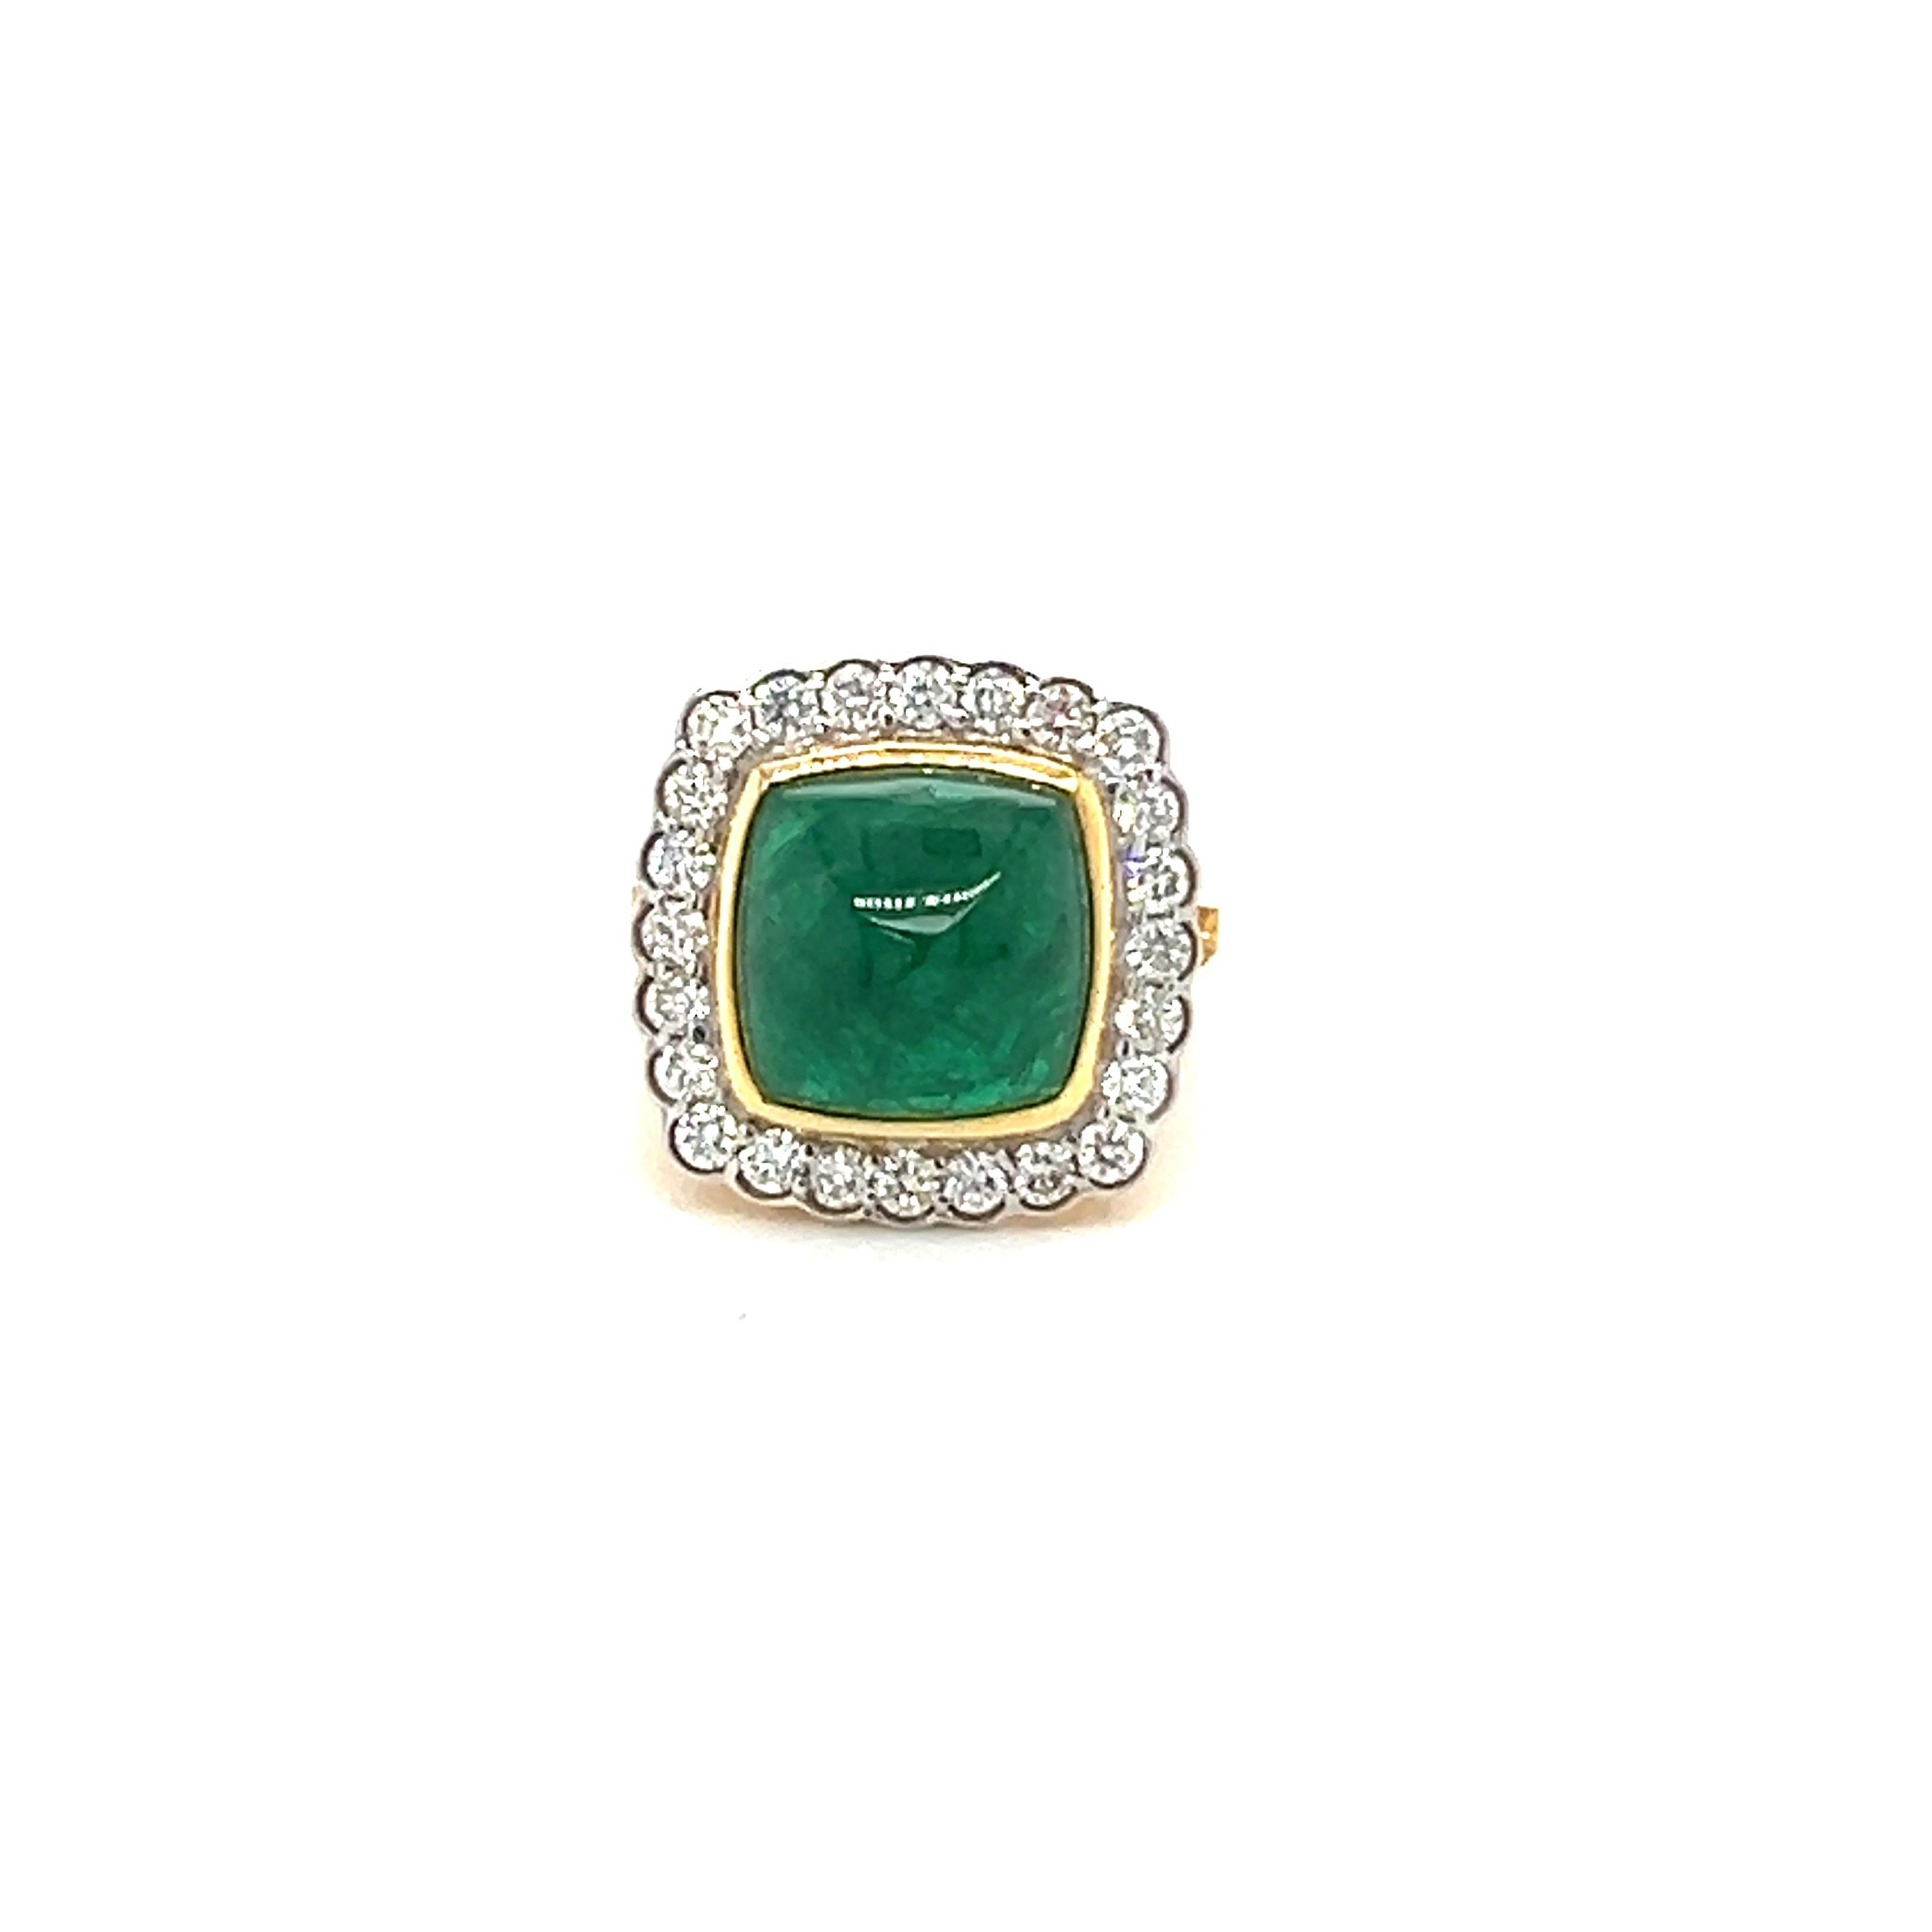 A stunning Natural Emerald Diamond ring set in 18-Kt yellow gold ring featuring with natural 6.44-carat emerald beautifully surrounded by 0.77-carat natural diamonds. 